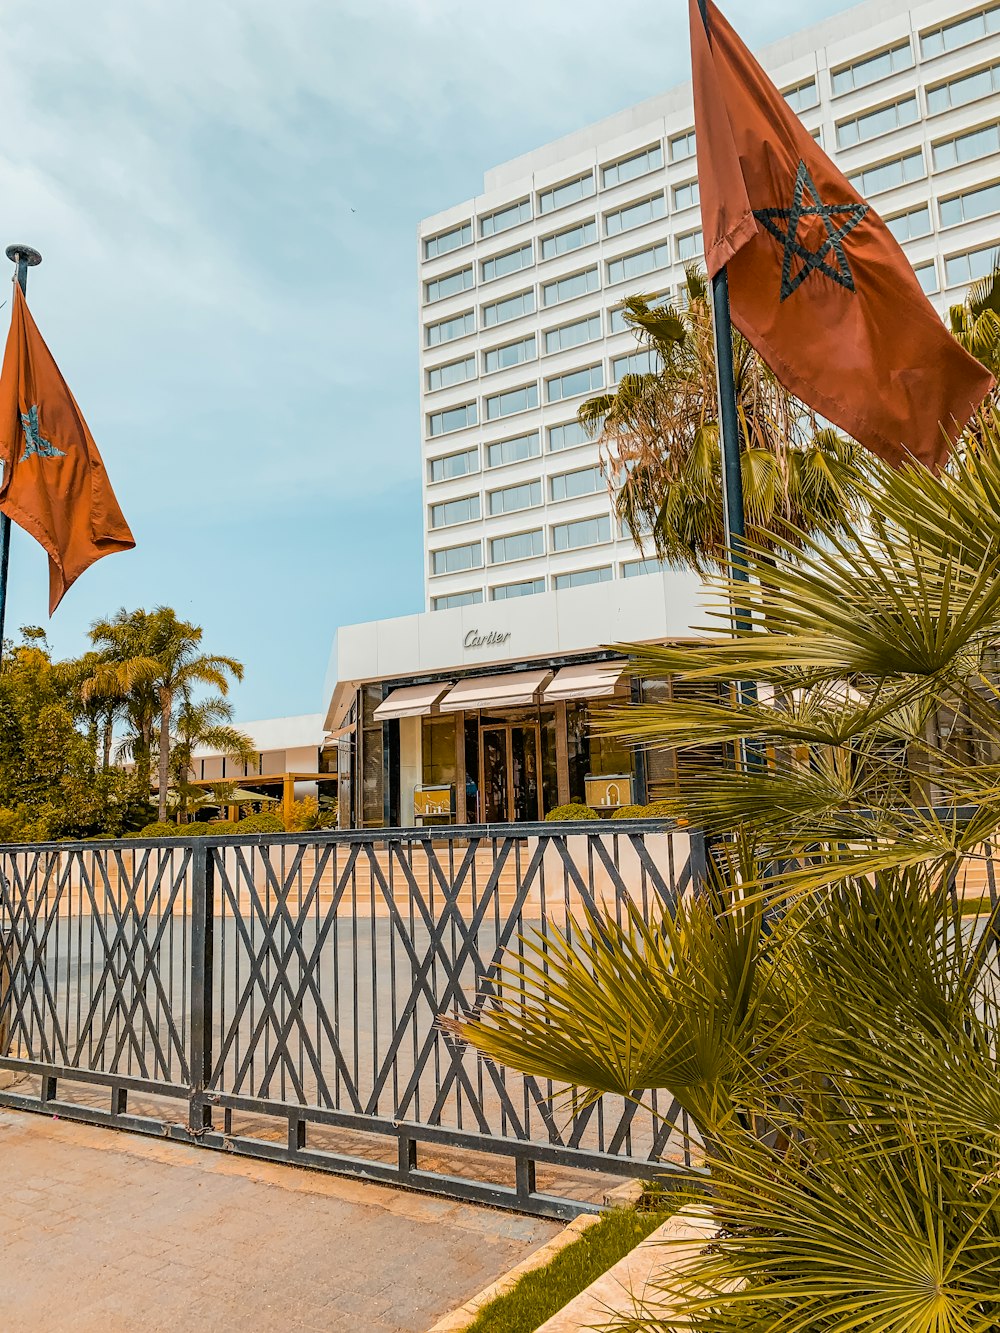 a fence with two orange flags and a building in the background